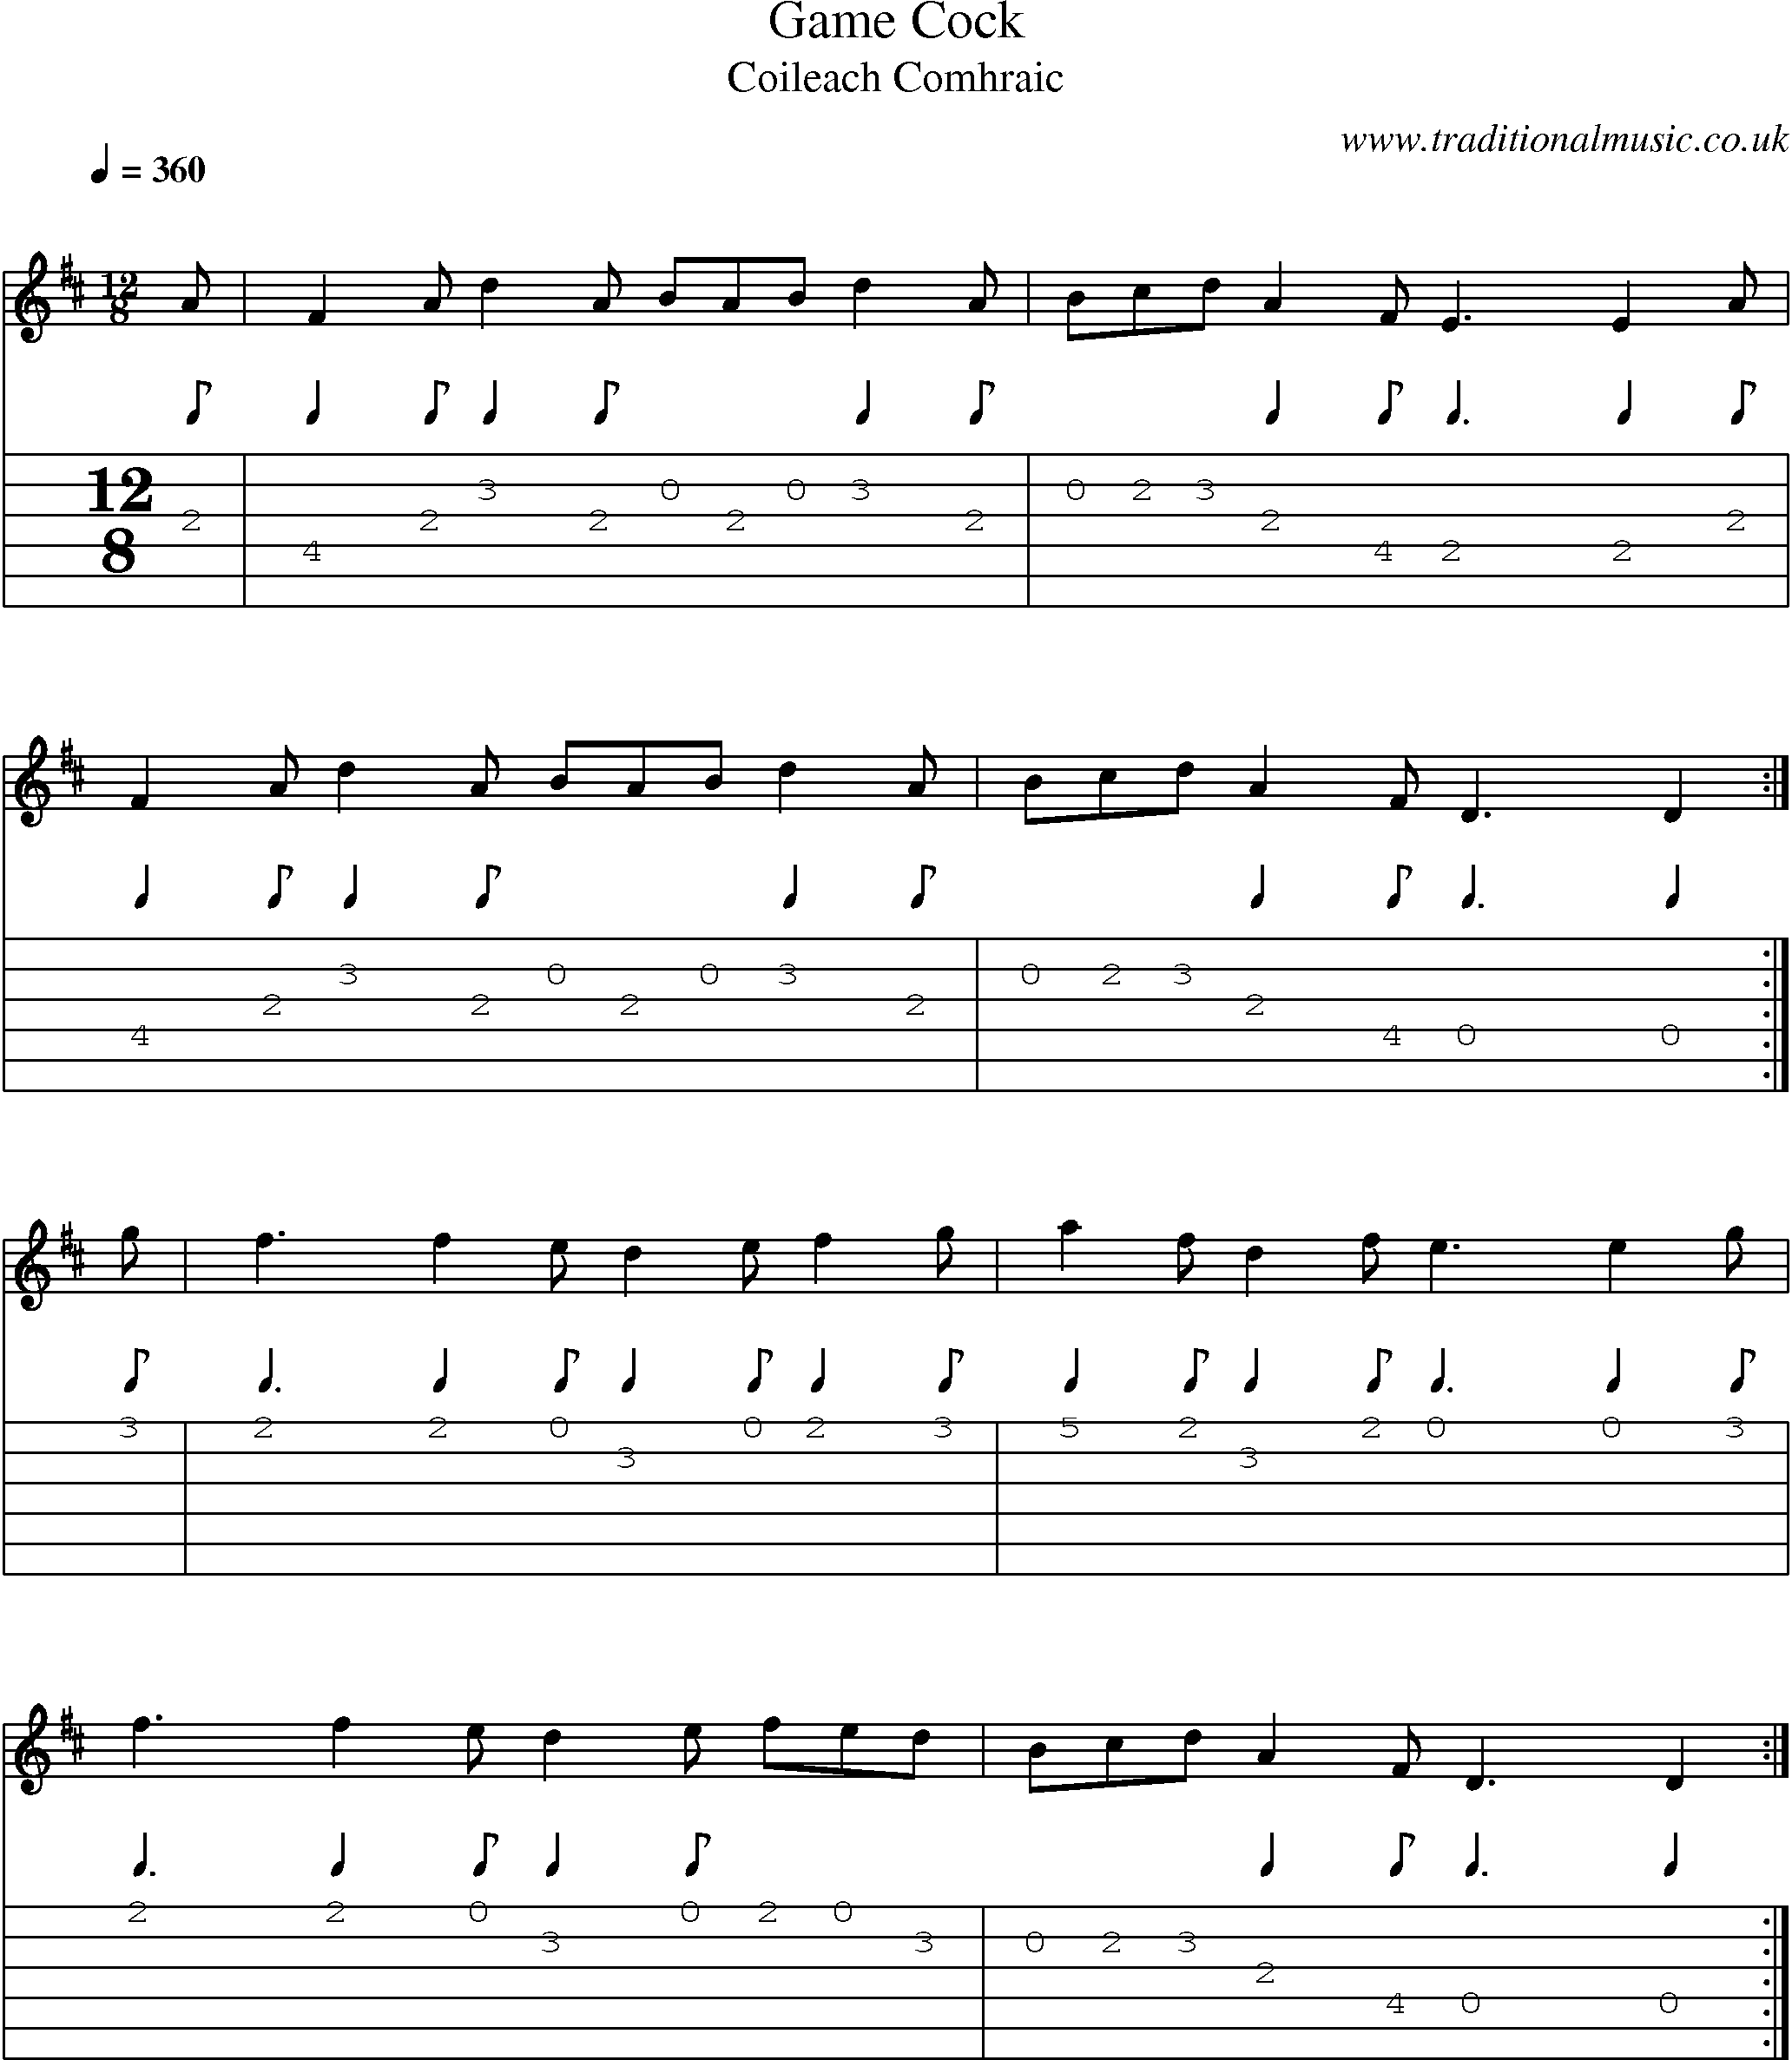 Music Score and Guitar Tabs for Game Cock